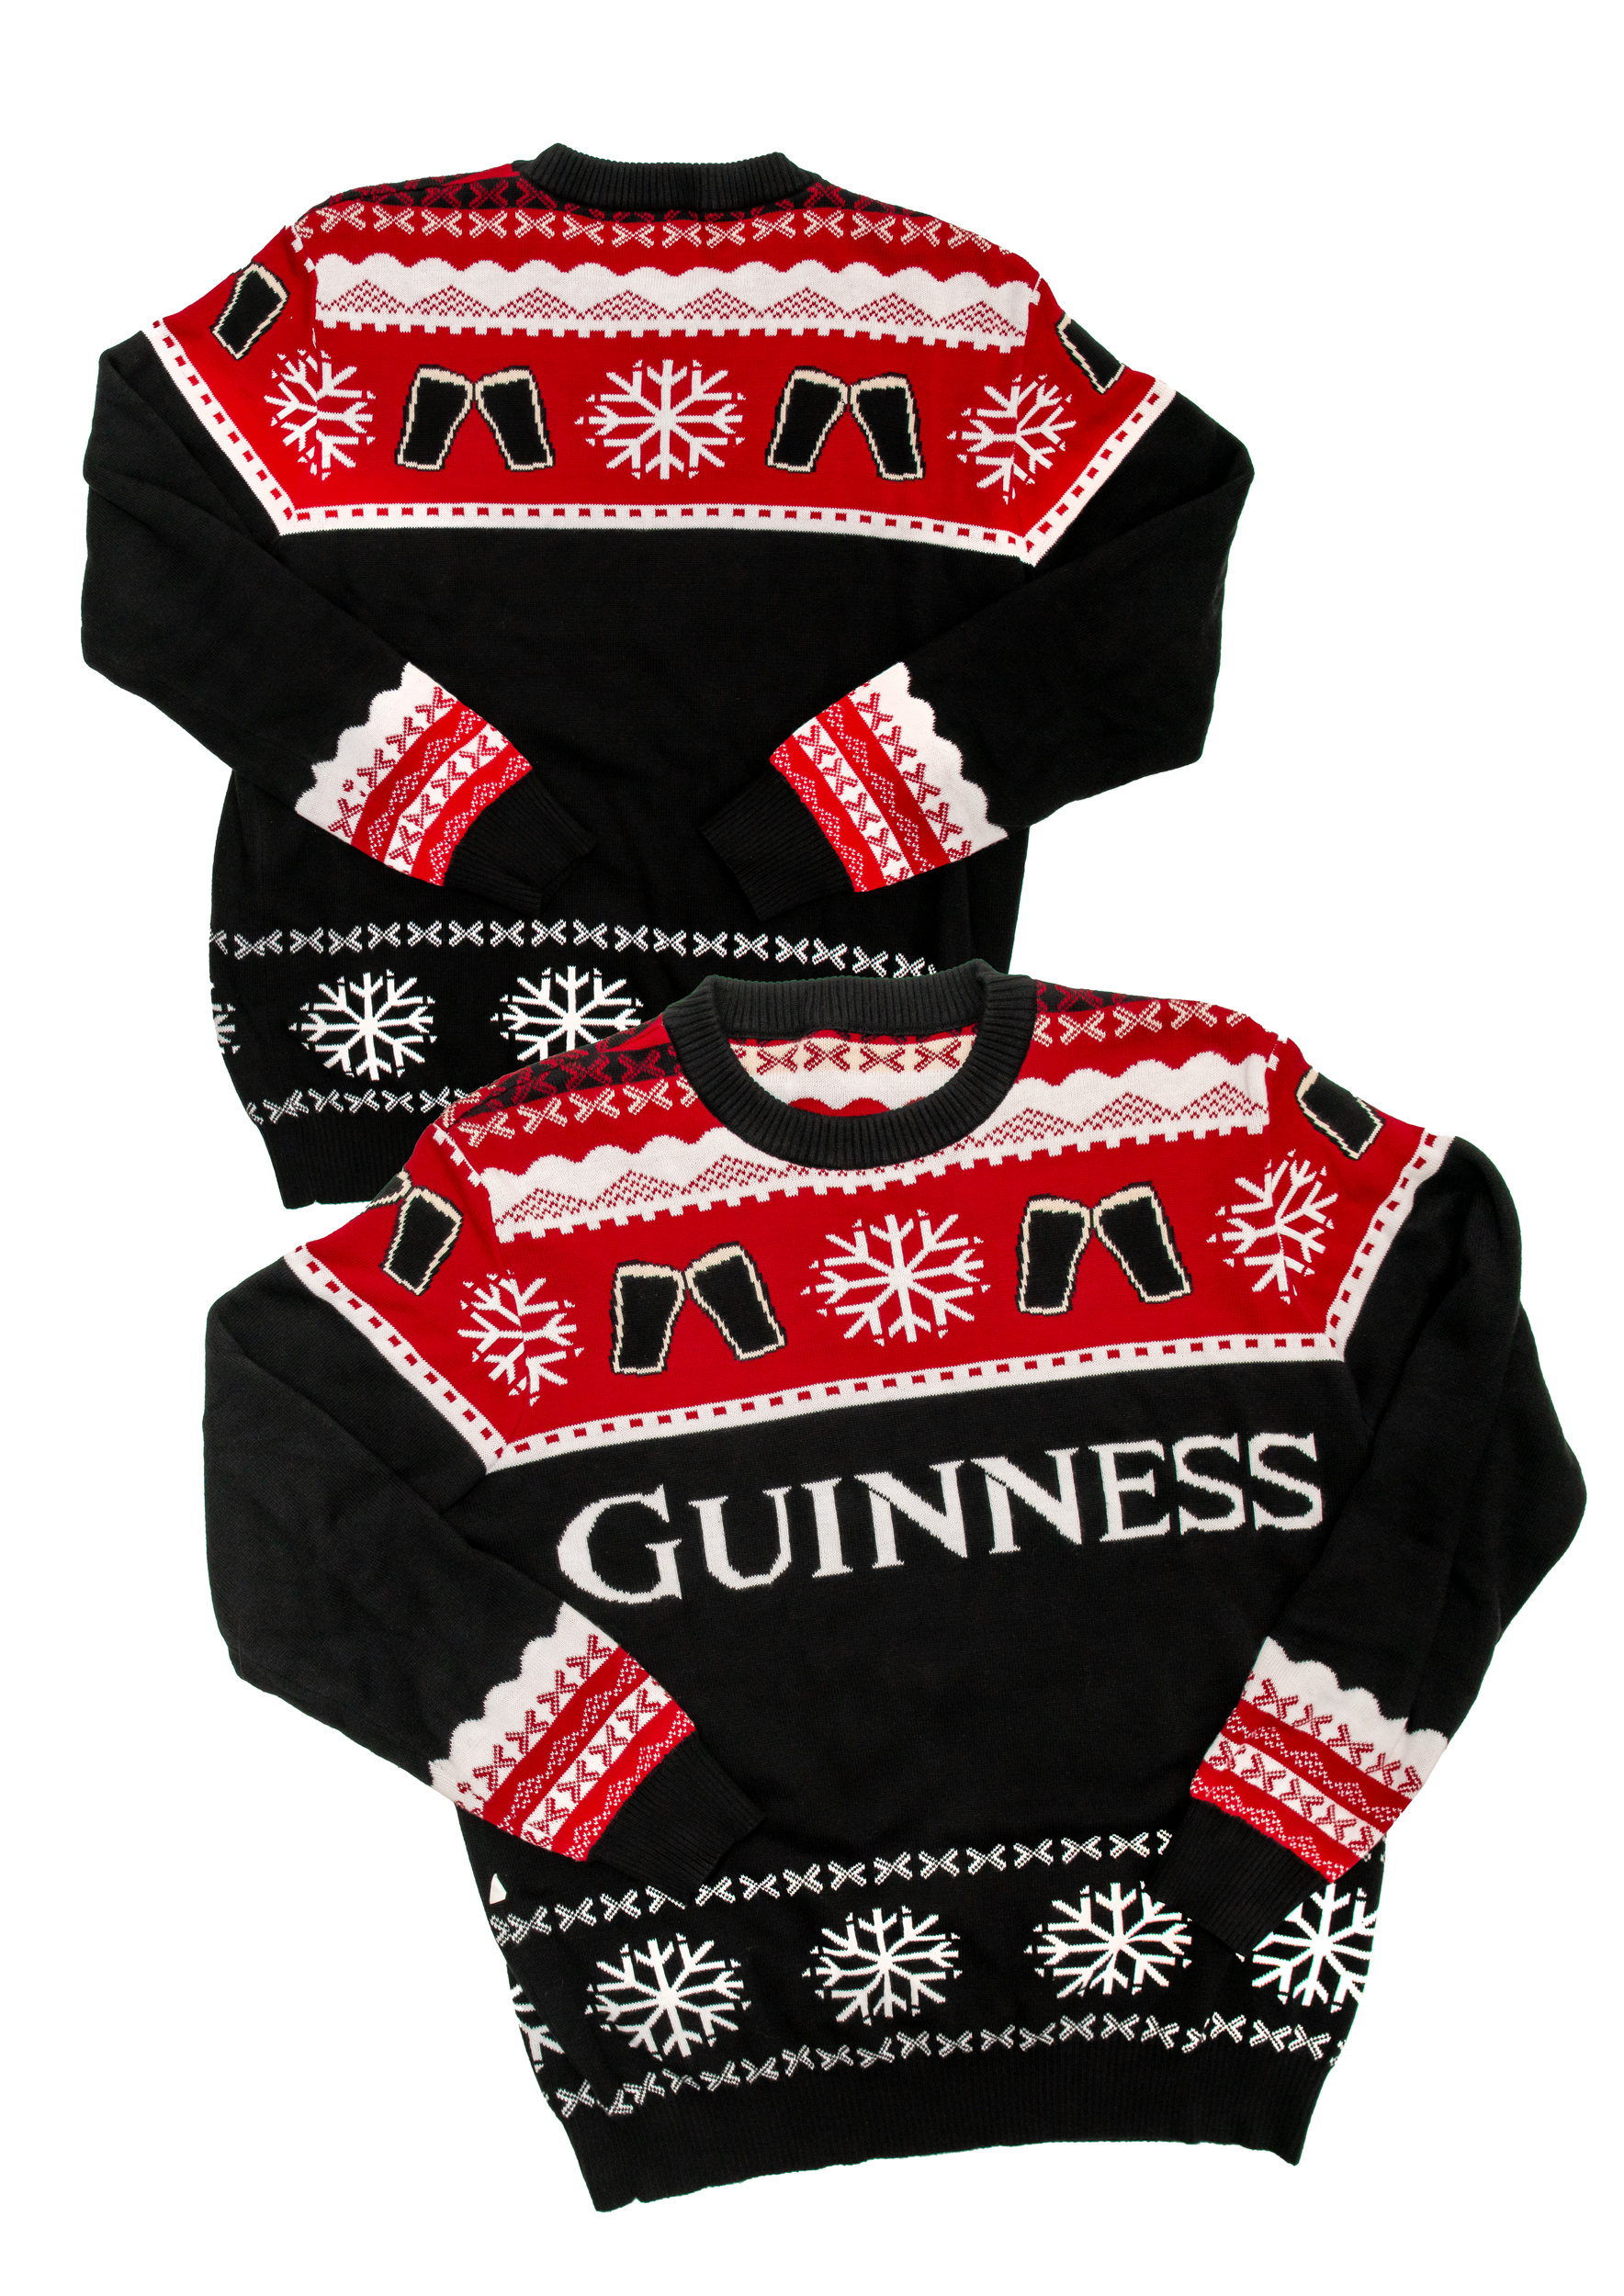 Two festive must-have Official Guinness Holiday Sweaters with Guinness on them for Guinness enthusiasts.